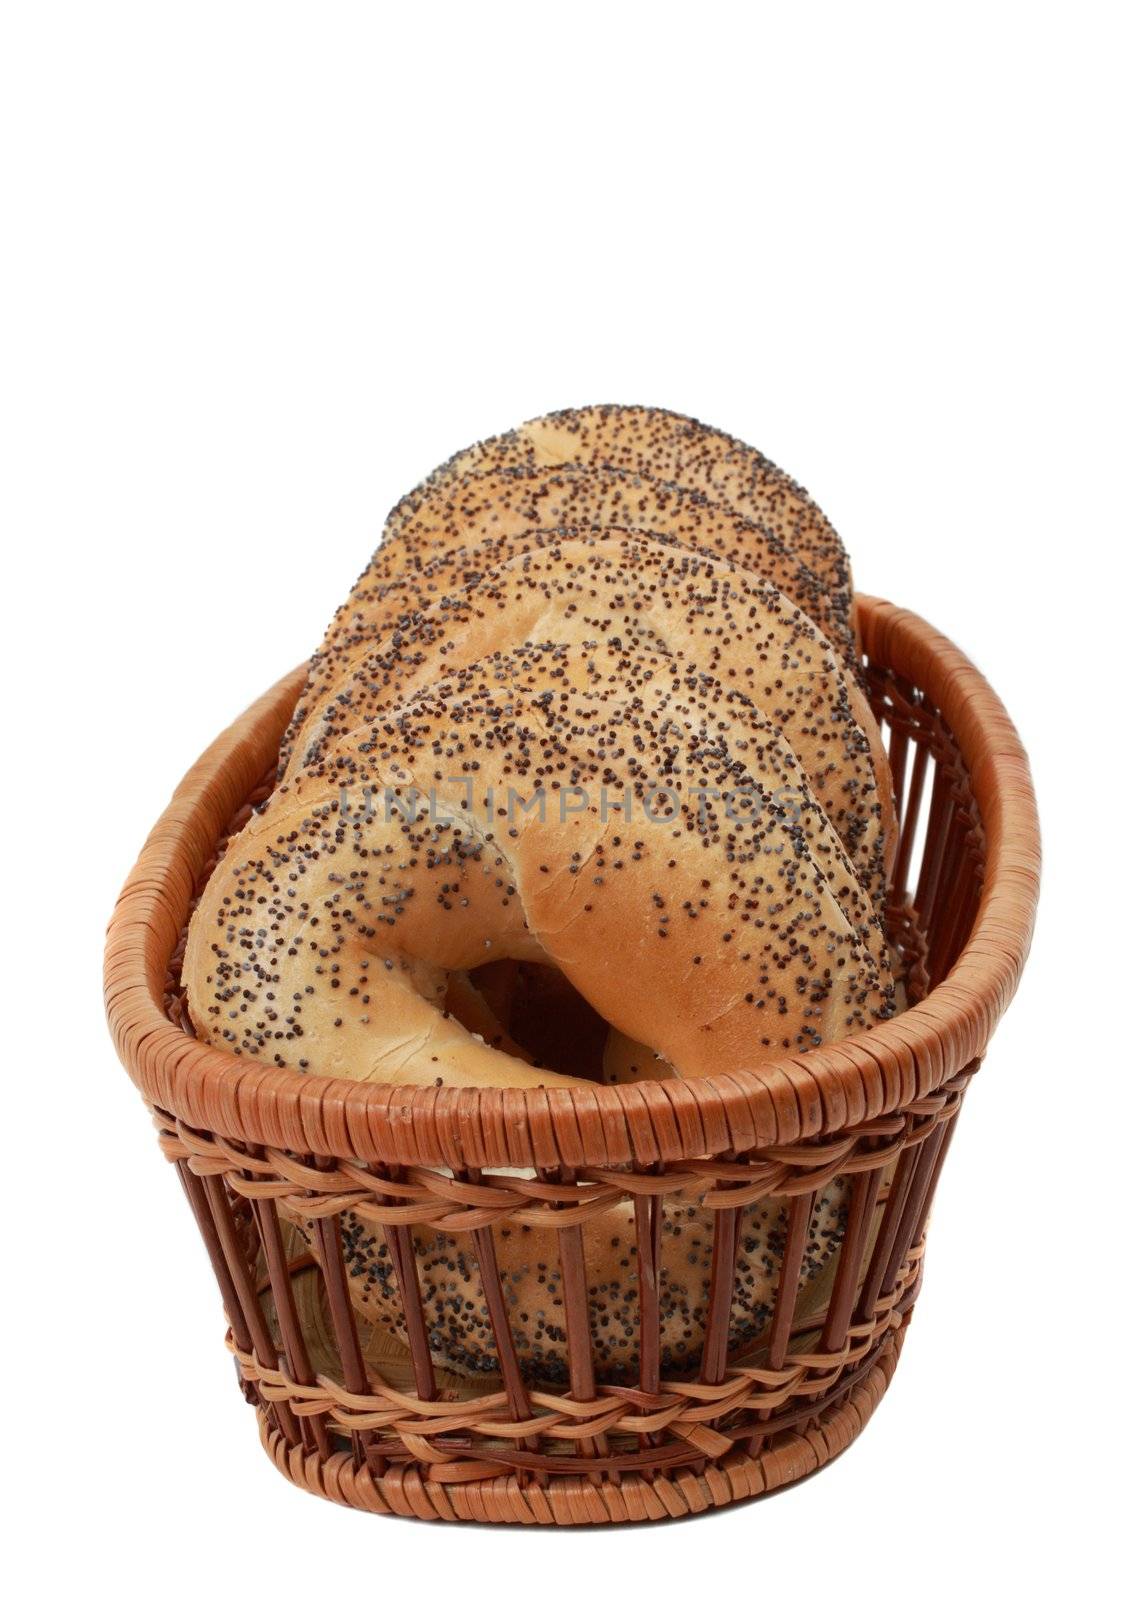 poppy seeds bagels in a basket isolated on white